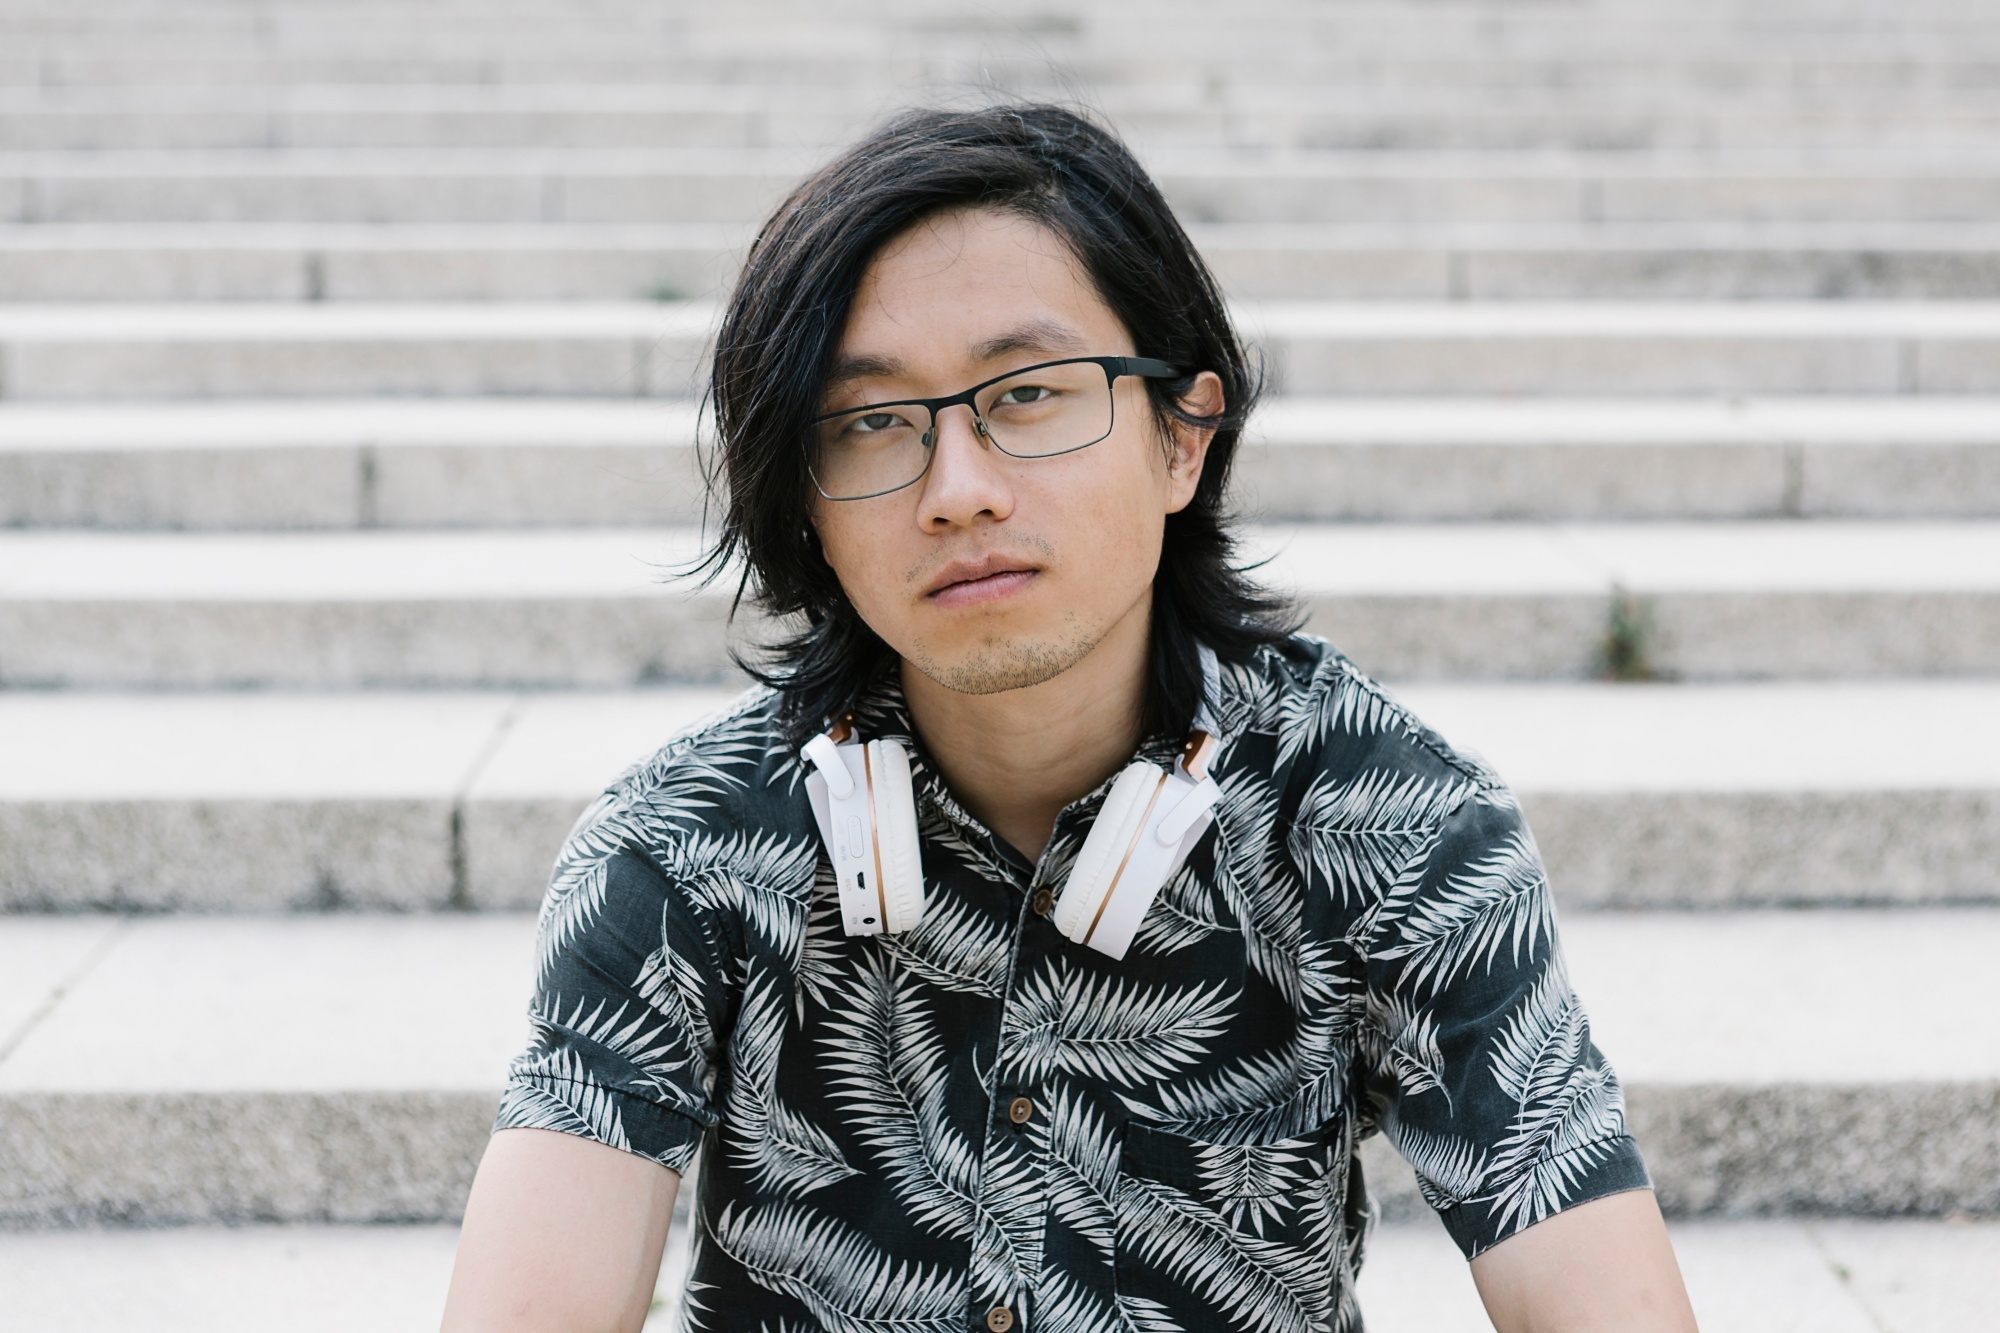 Asian man with long hair wearing eyeglasses sitting on outdoor steps